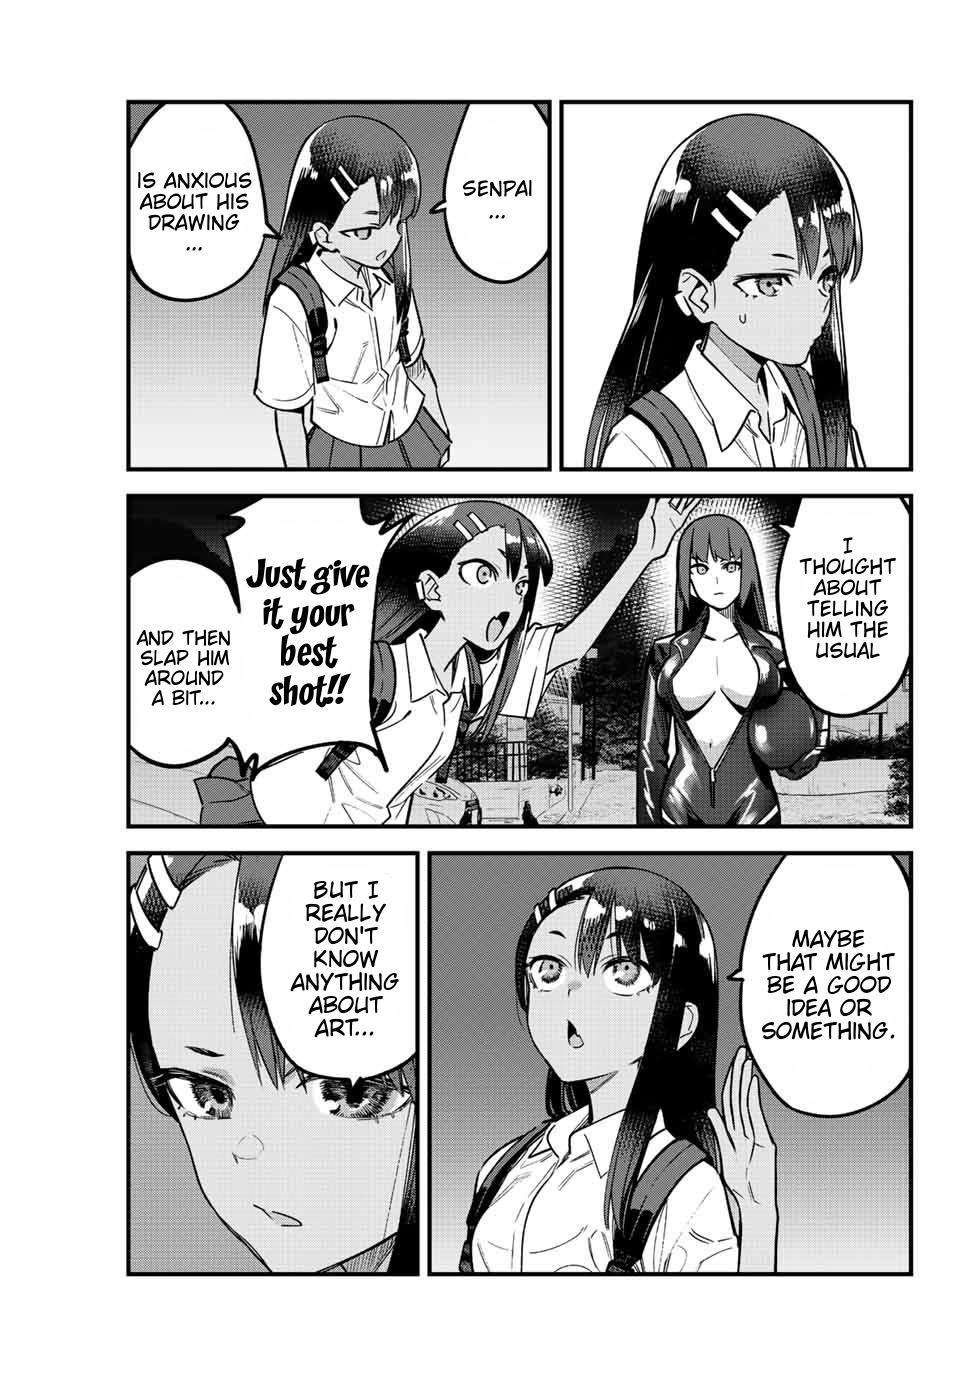 Don't Toy with Me, Miss Nagatoro 15